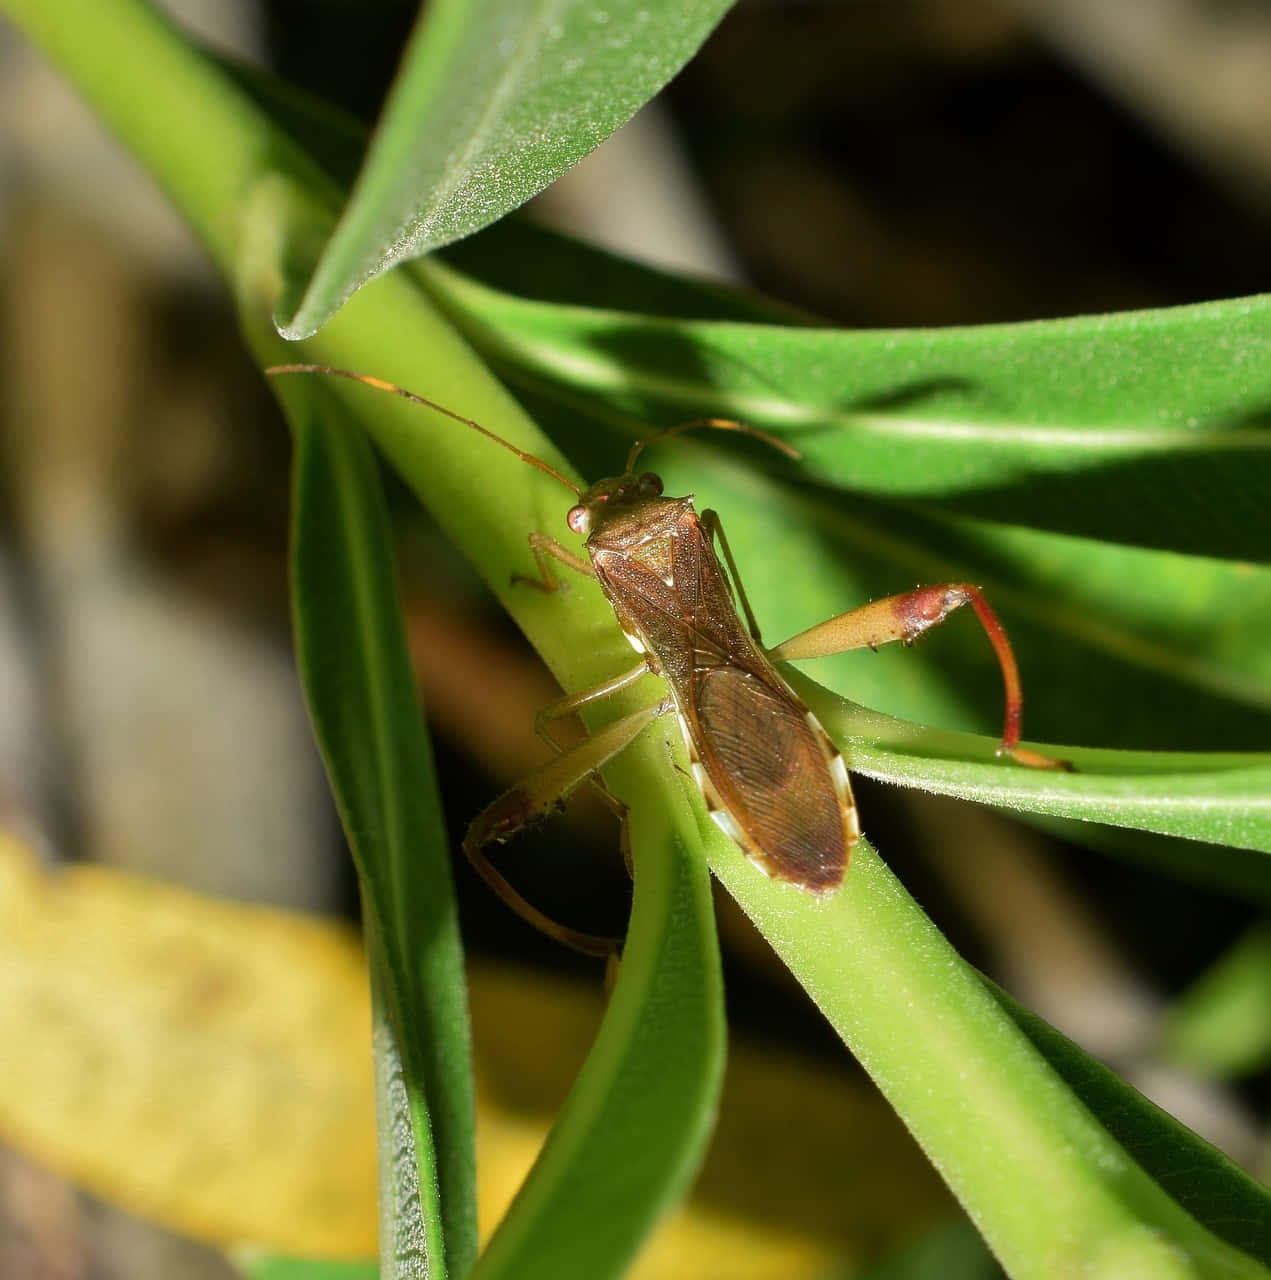 Leaffooted_ Bug_ On_ Green_ Plant.jpg Wallpaper